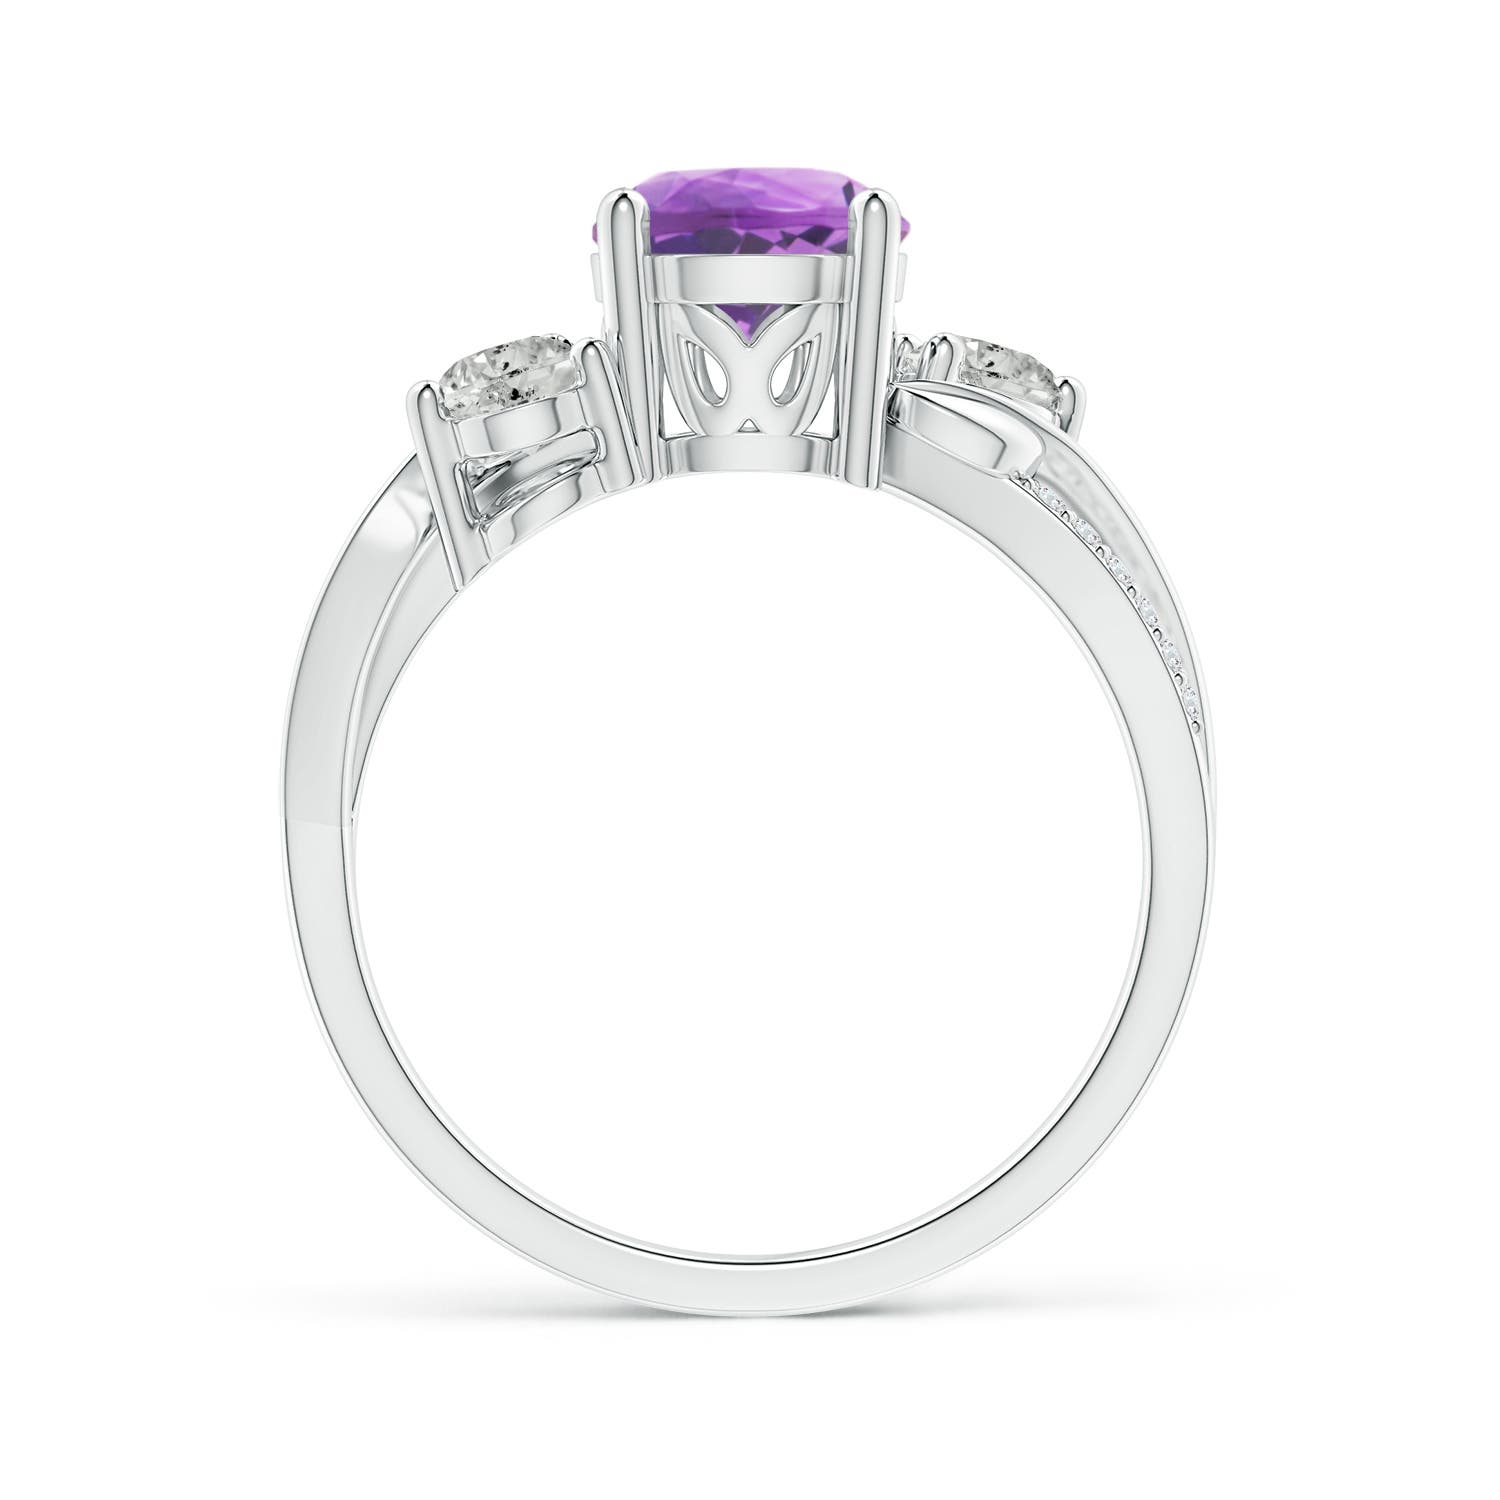 A - Amethyst / 1.53 CT / 14 KT White Gold